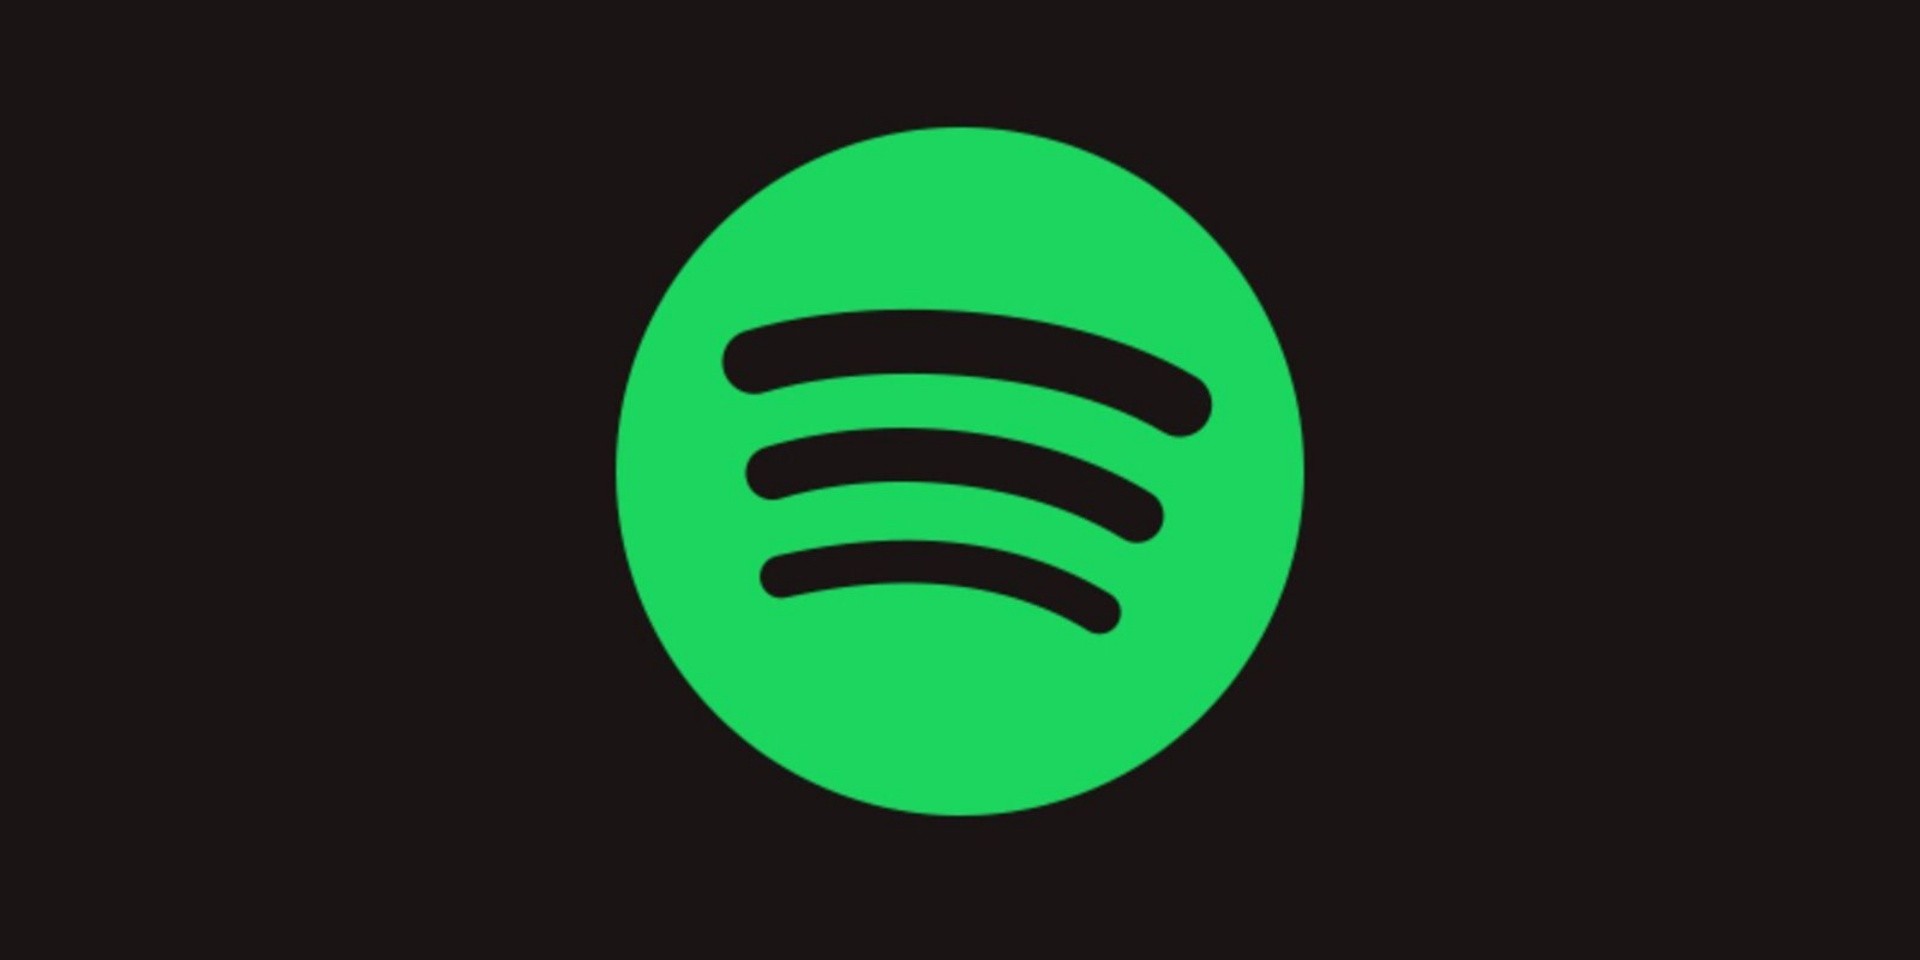 Spotify is testing out its latest feature: Storyline